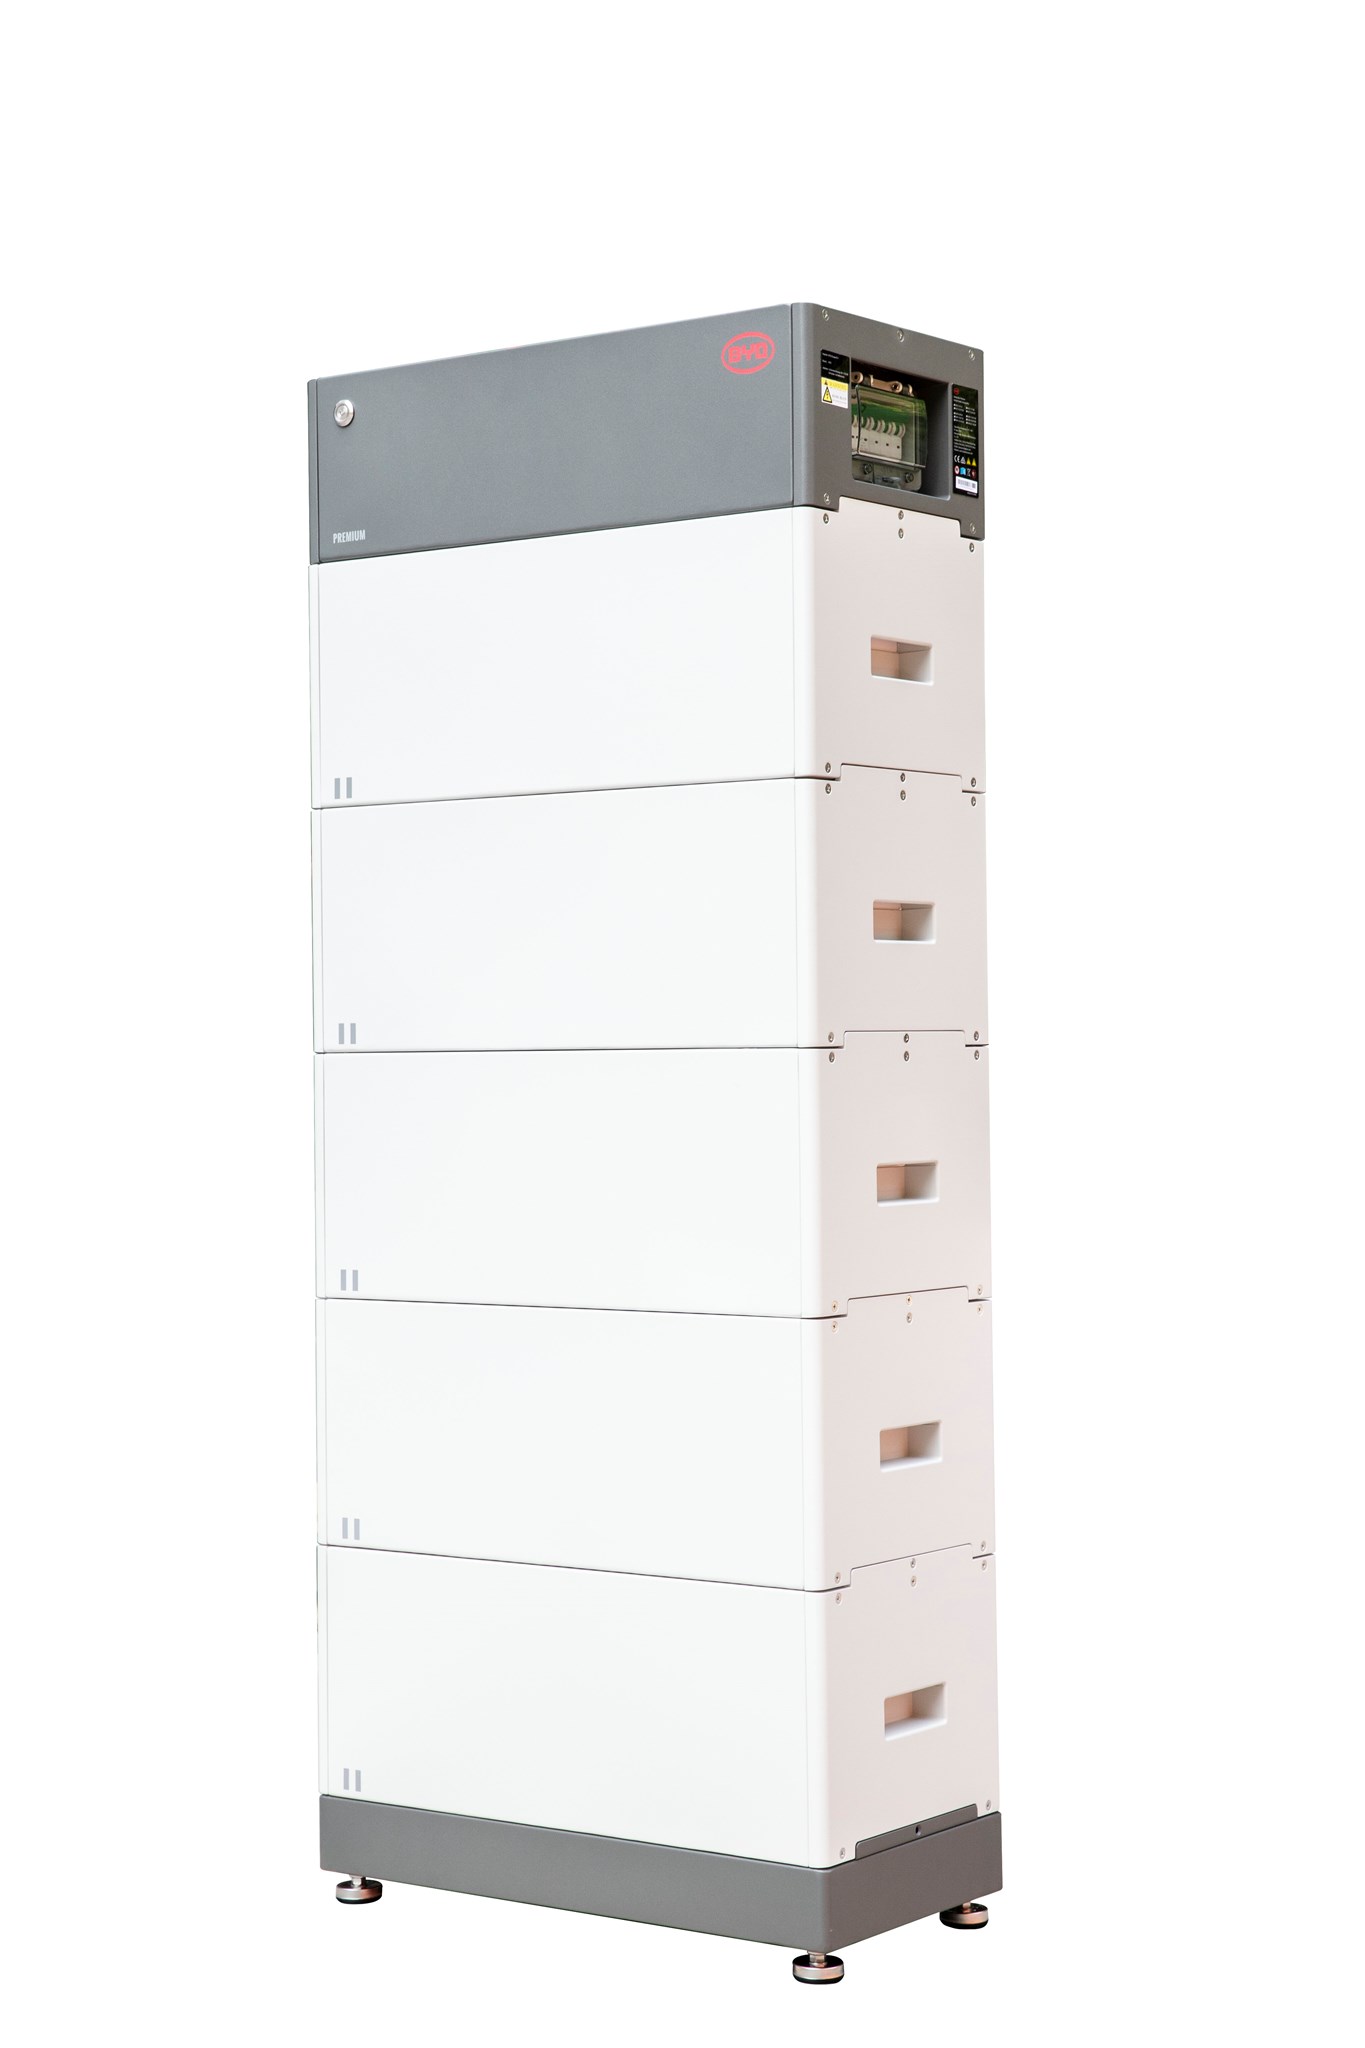 Picture of BYD Battery-Box Premium HVM 13.8 - 13.80 kW 5x 2.76 kW/h (PV battery storage)